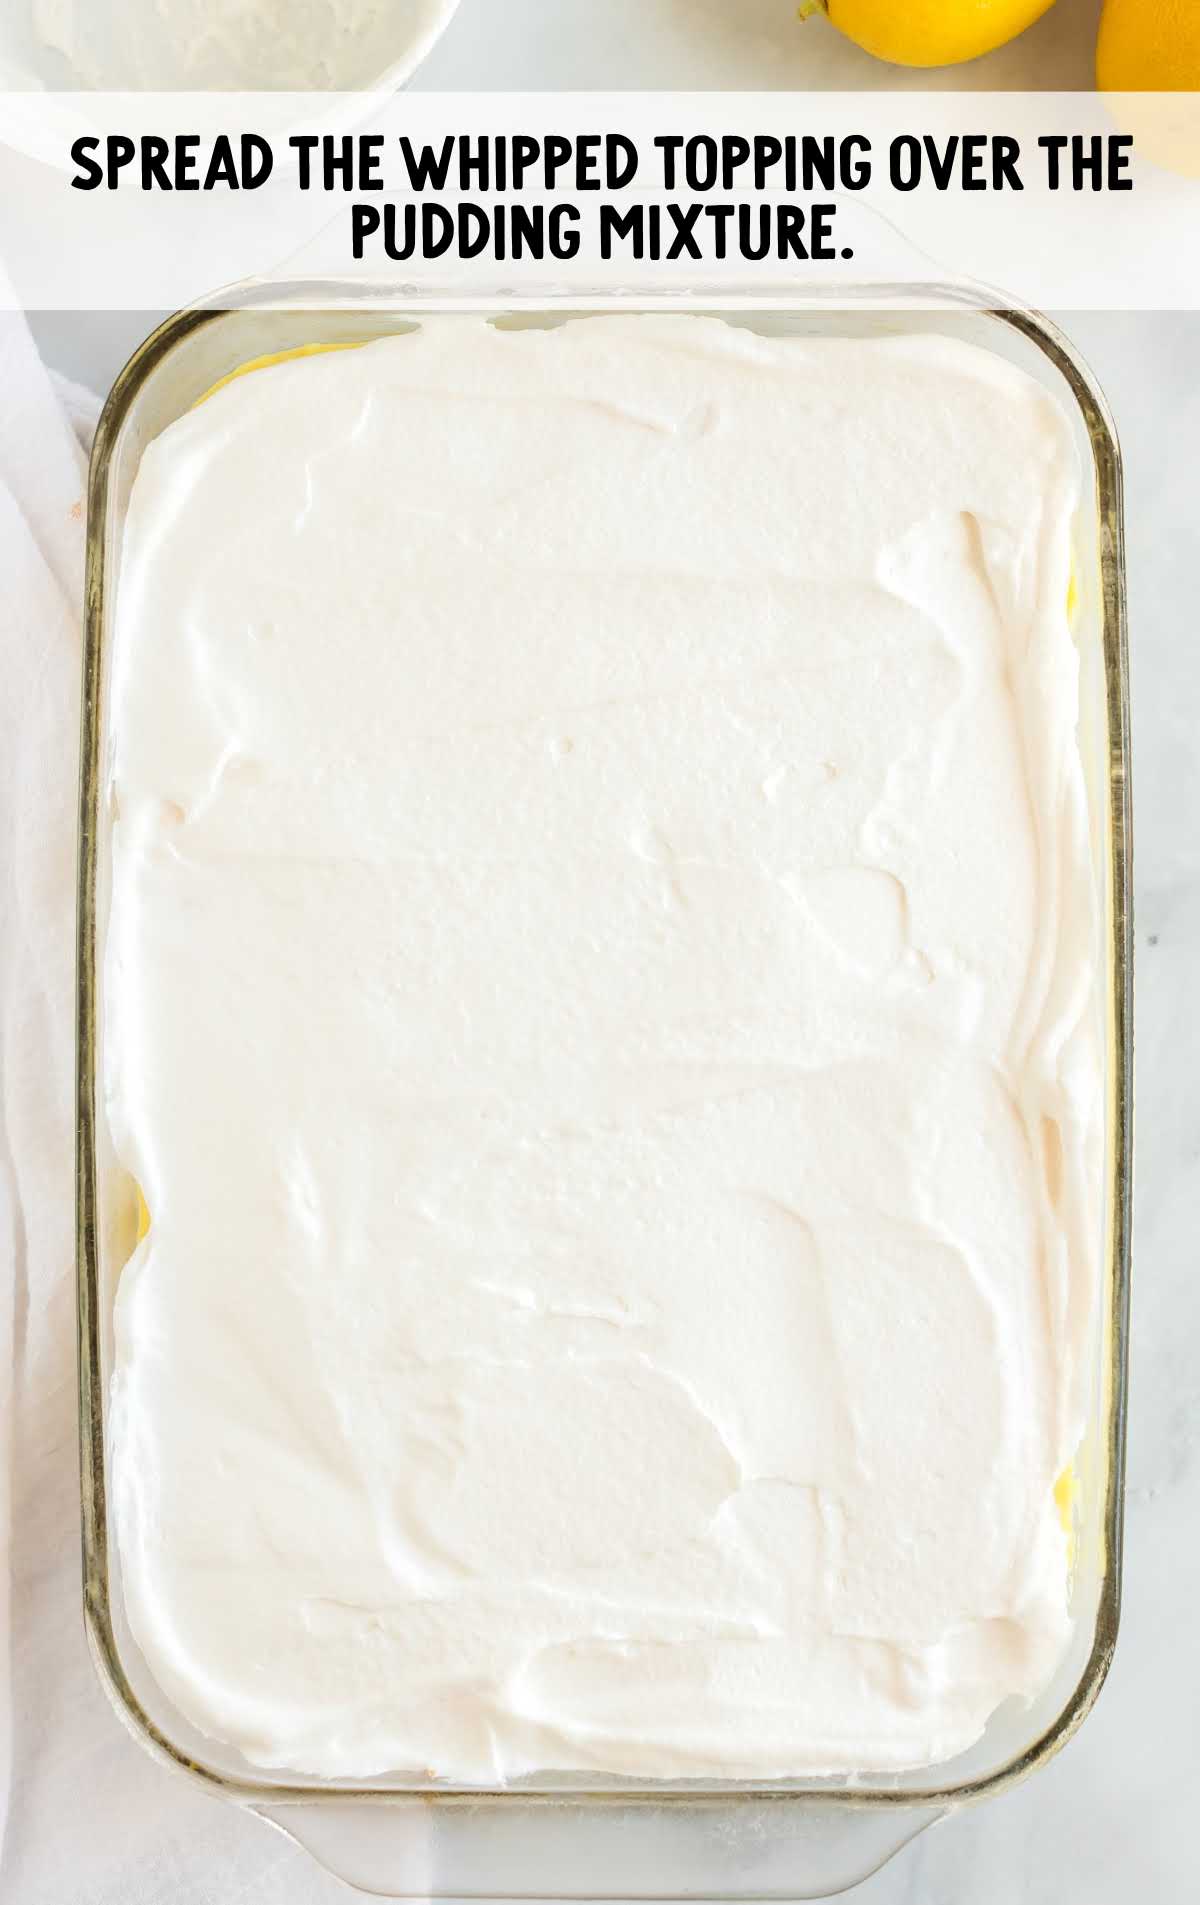 whipped topping spread over the pudding mixture